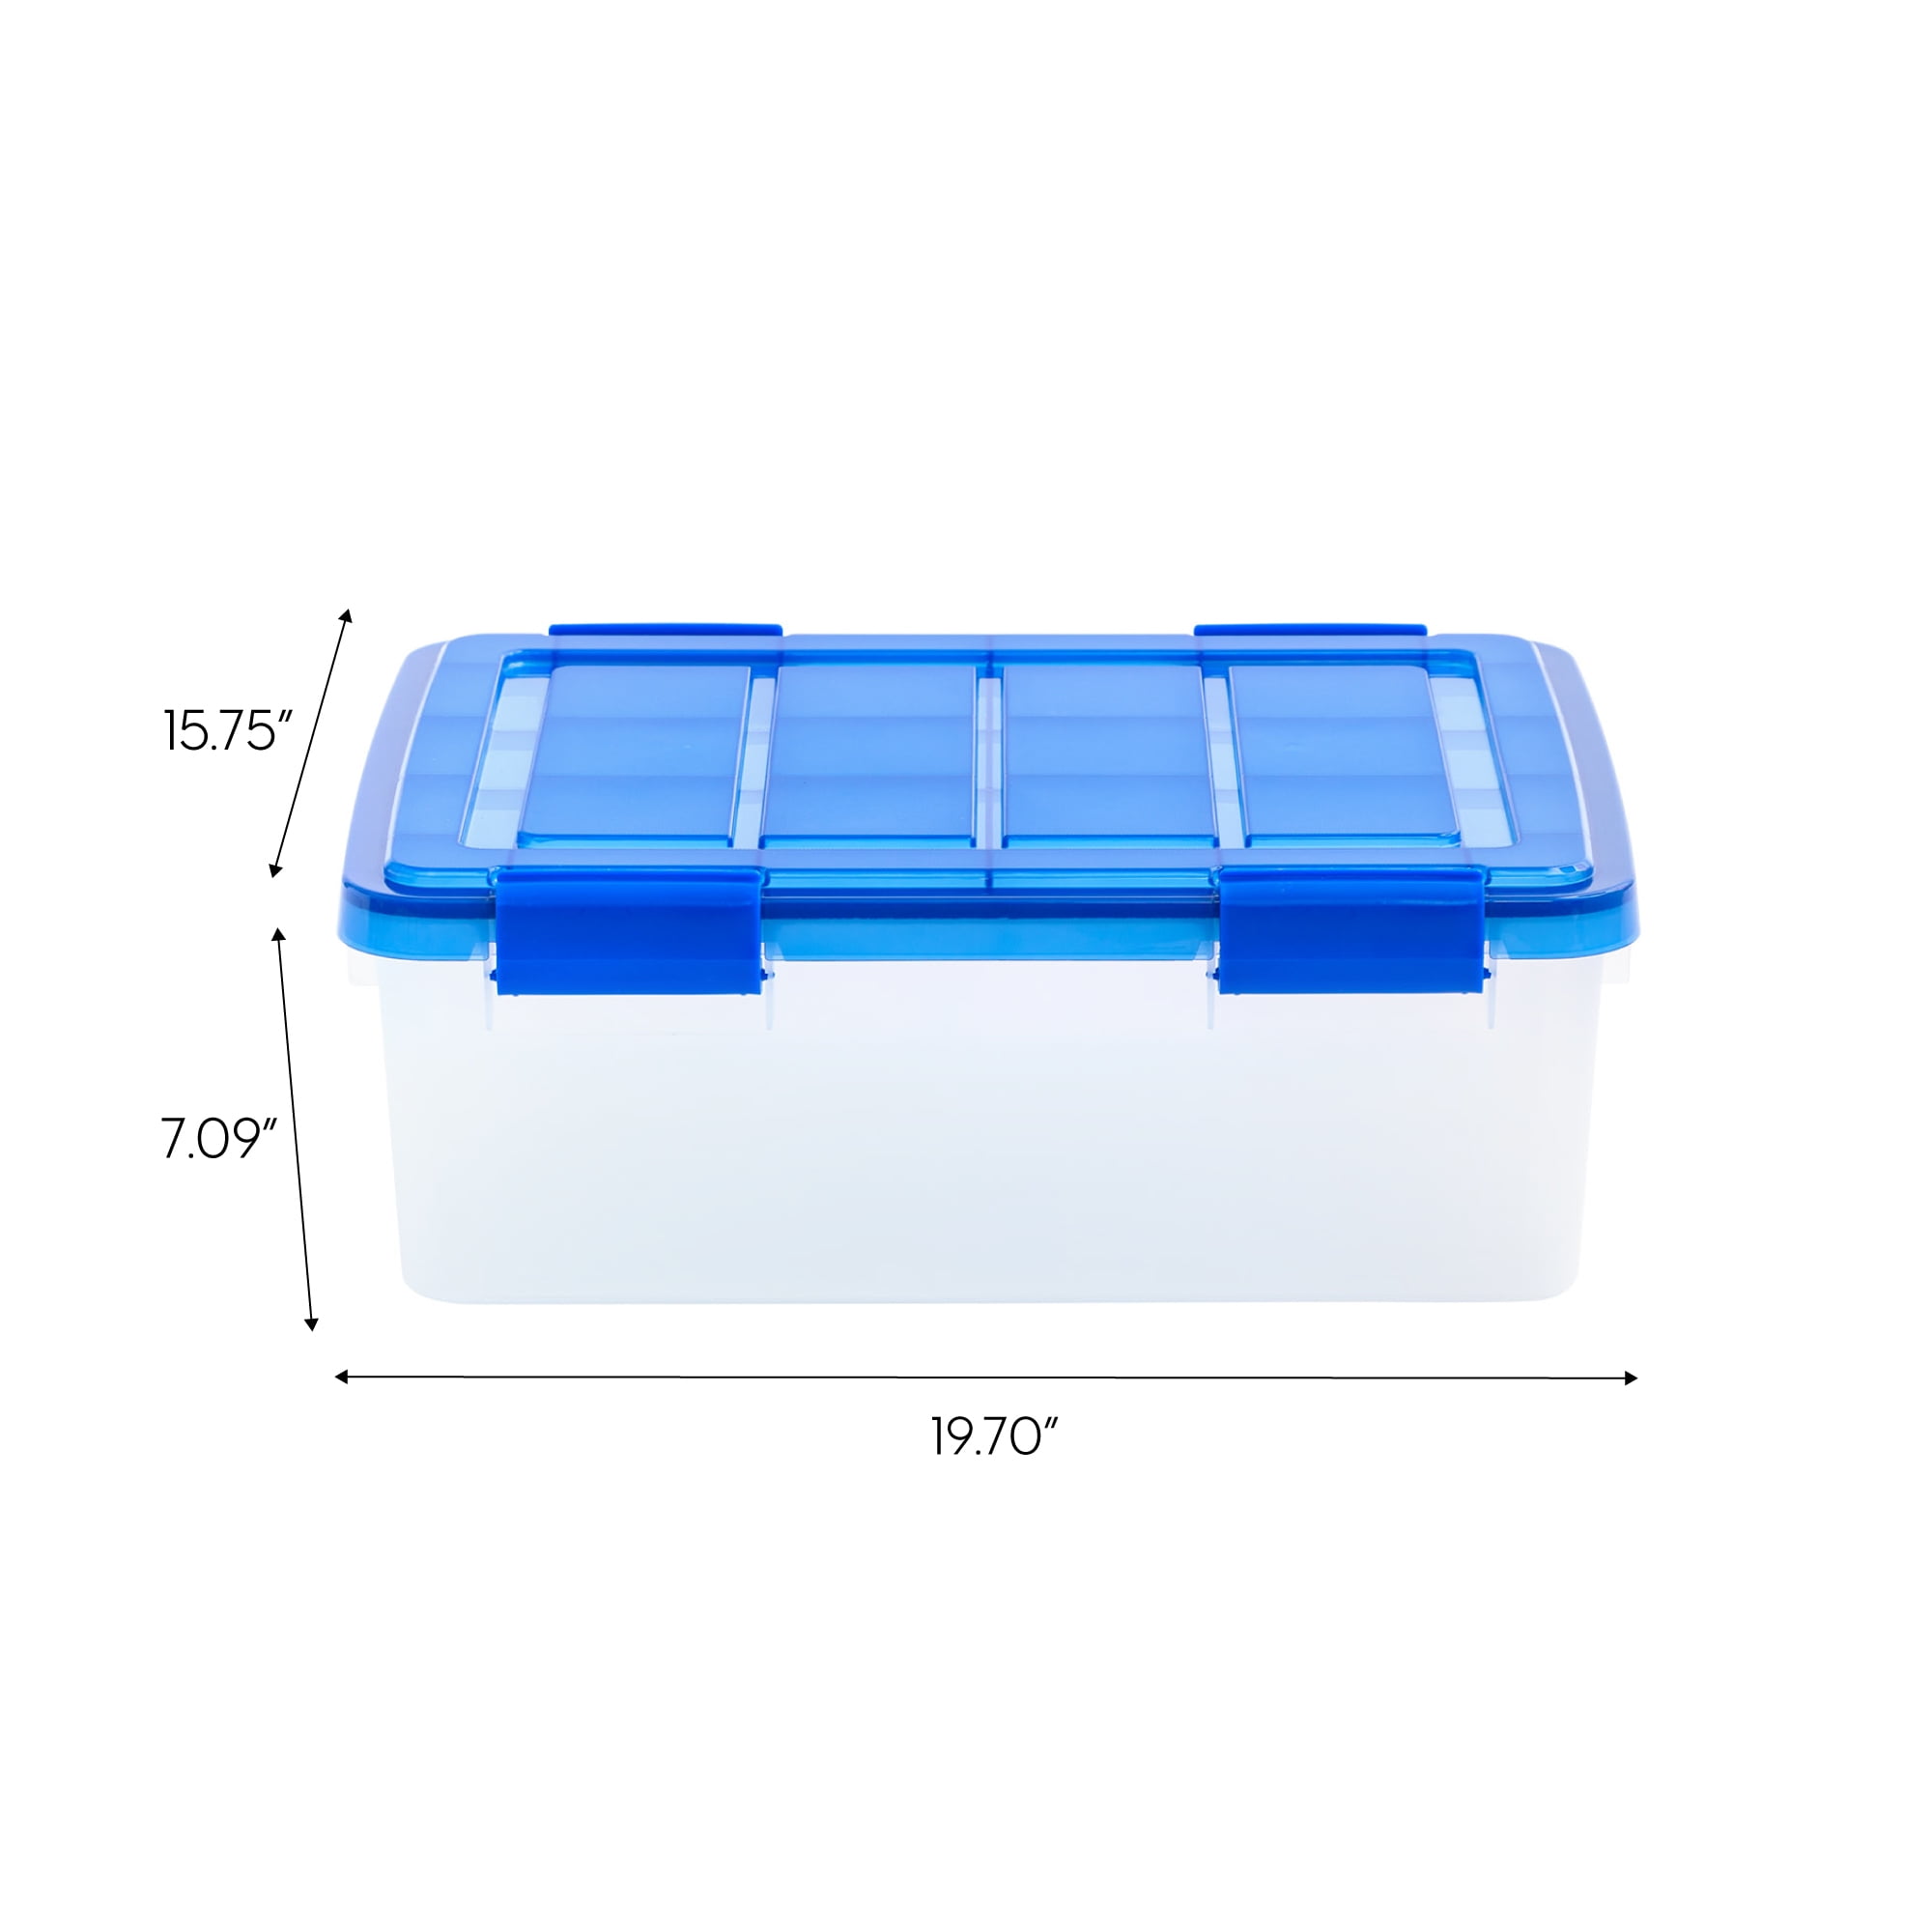 IRIS® Weathertight® Plastic Storage Container With Latch Lid, 18 3/4 x 17  3/4 x 23 5/8, Clear